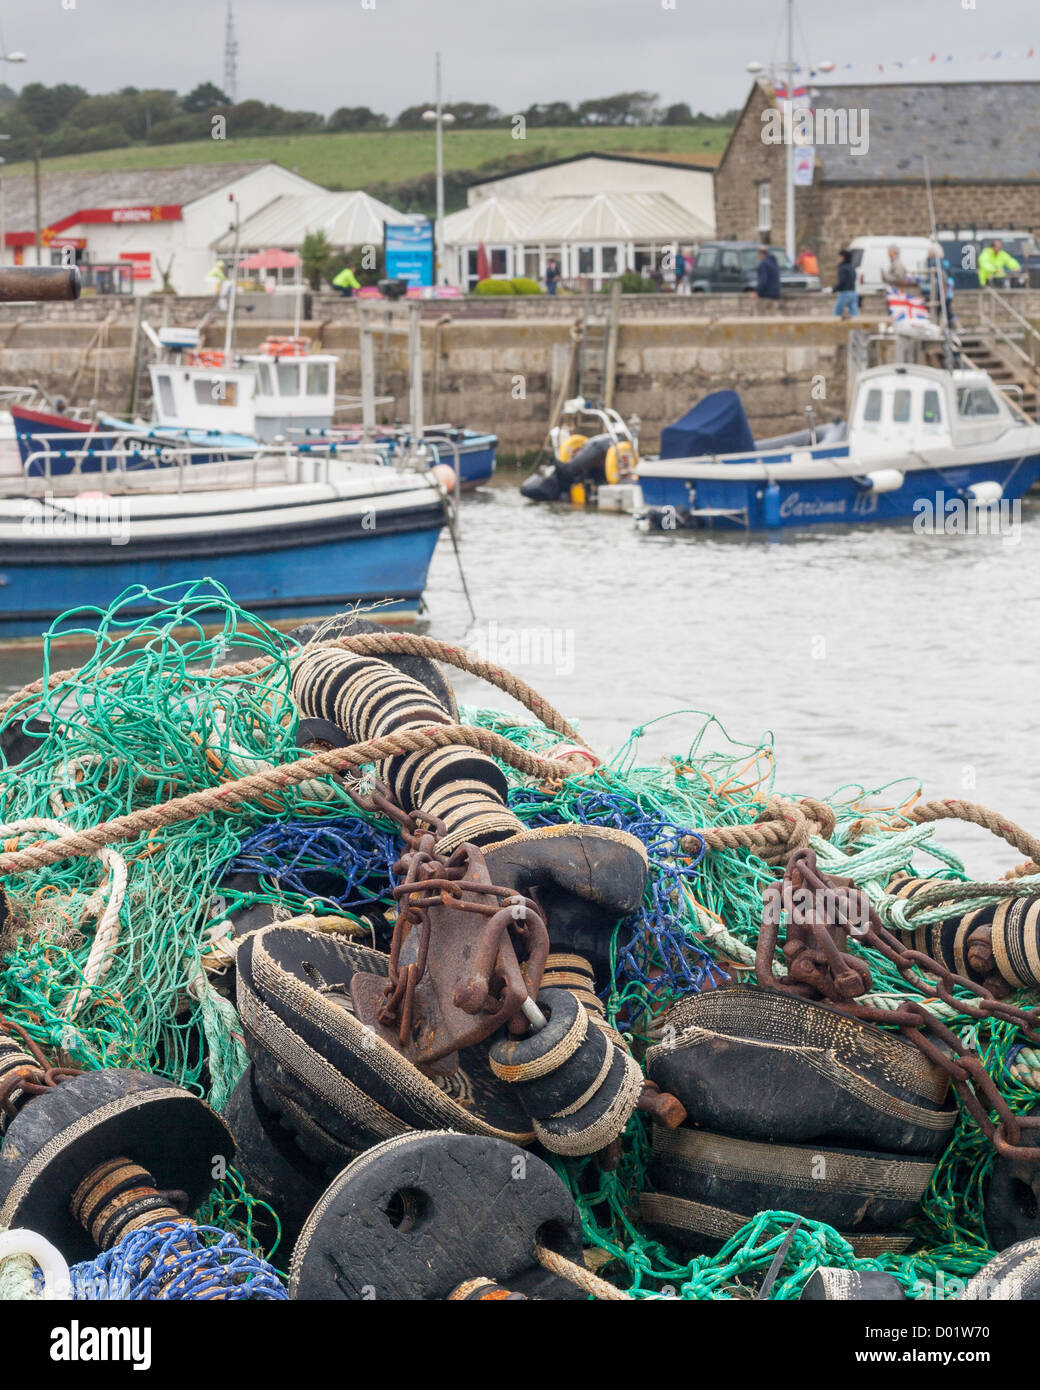 commercial fishing nets Stock Photo